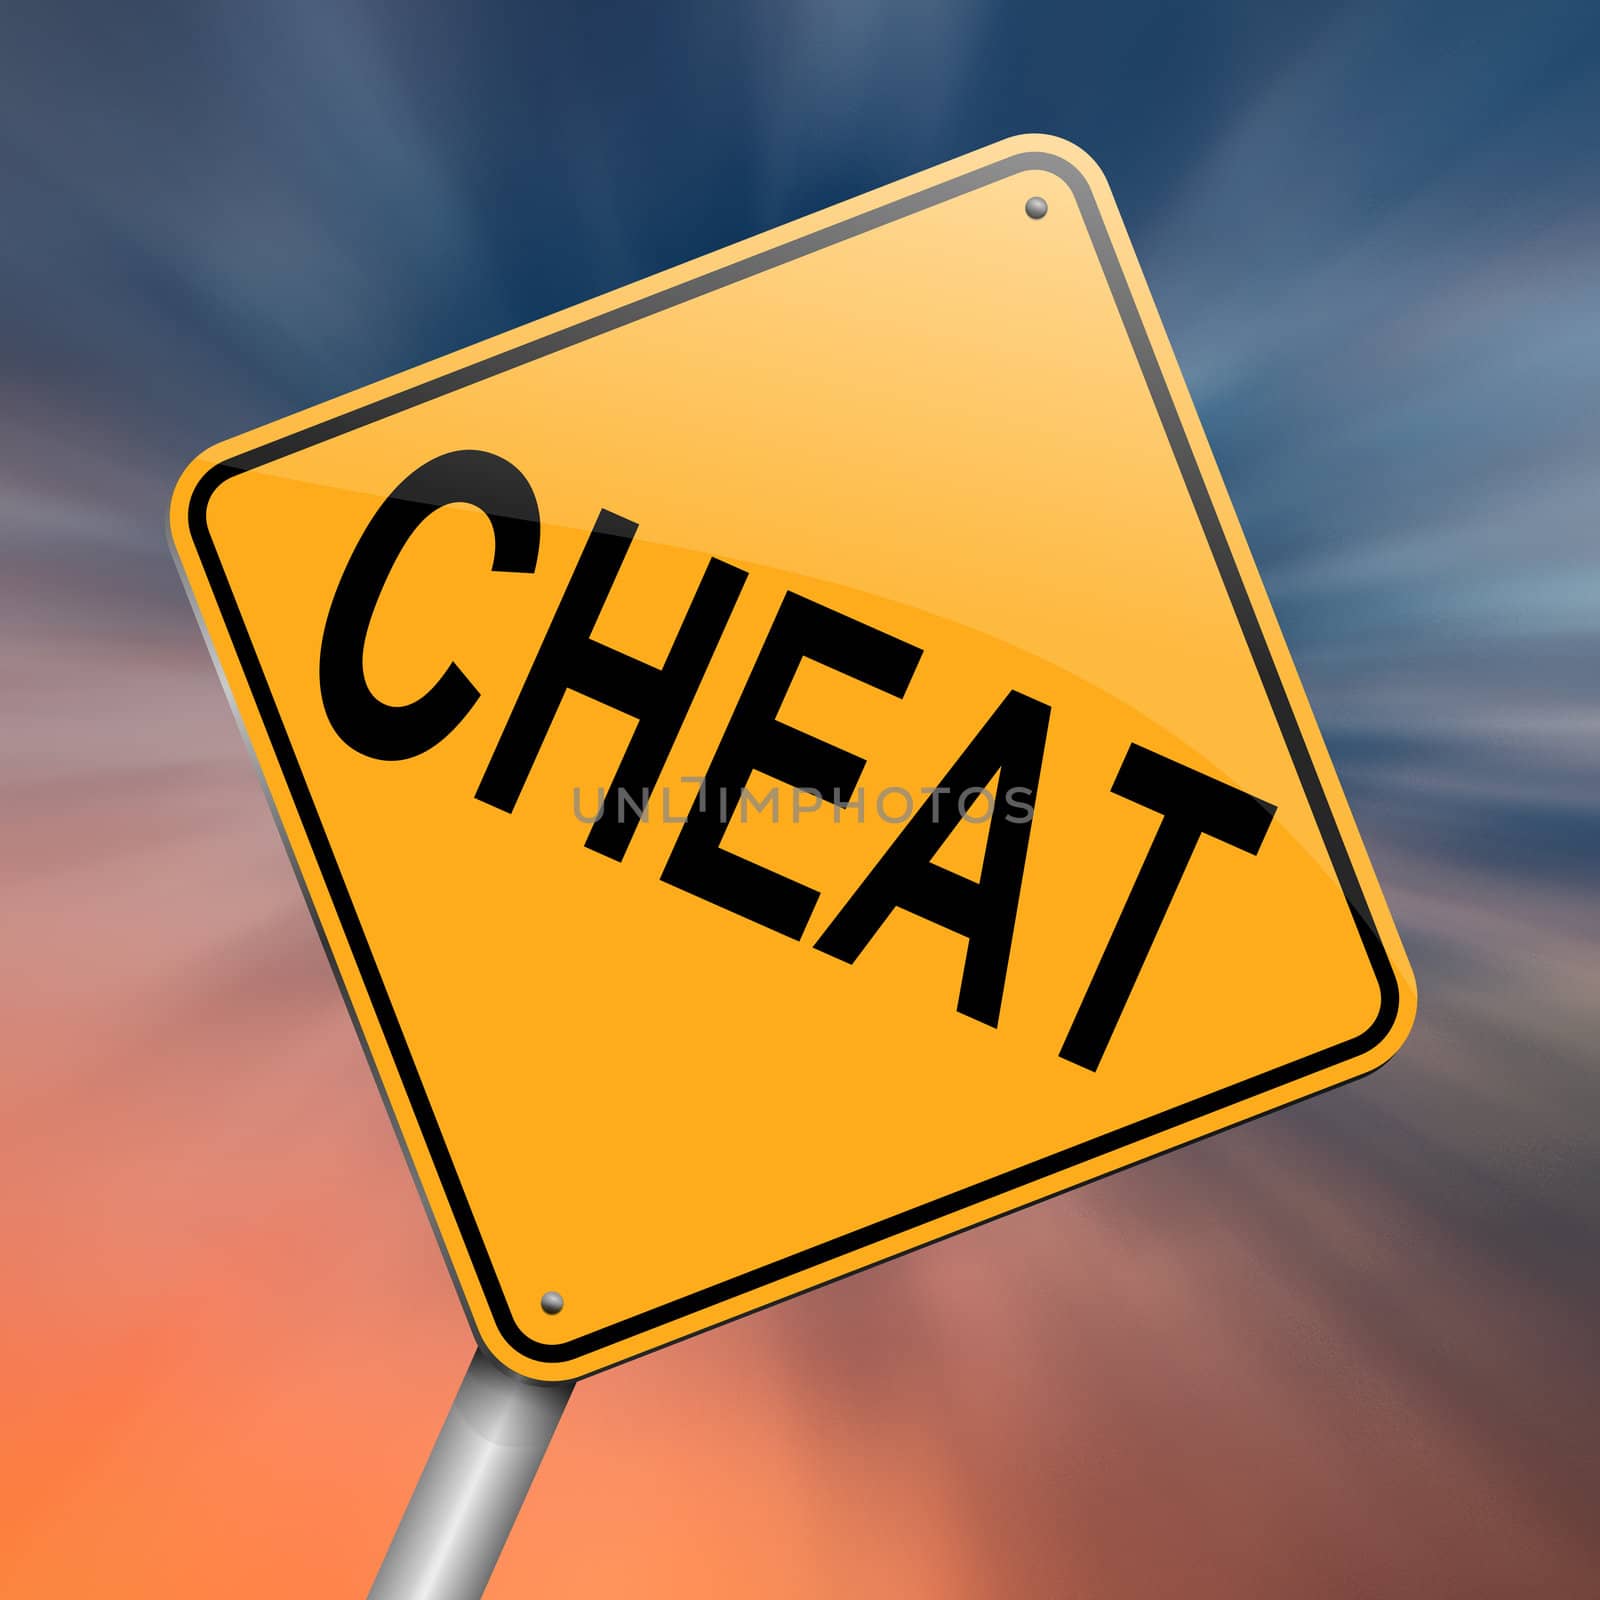 Illustration depicting a roadsign with a cheat concept. Abstract background.